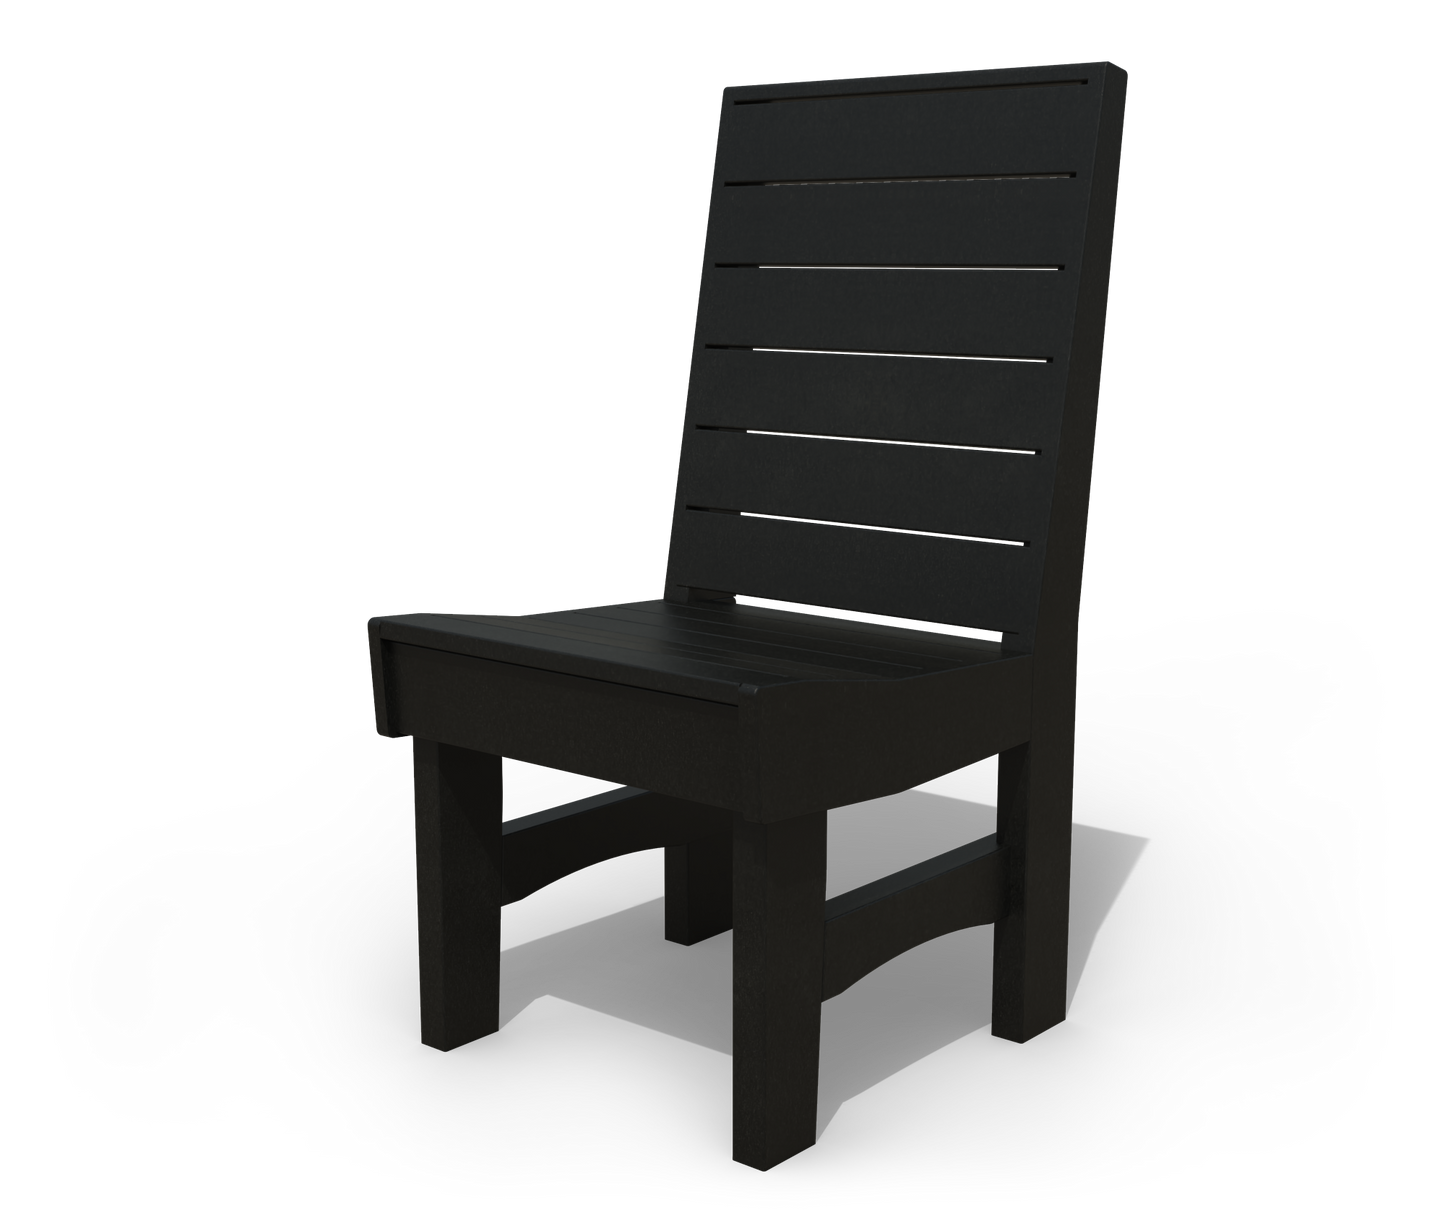 Patiova Recycled Plastic Coastal Dining Side Chair - LEAD TIME TO SHIP 3 WEEKS